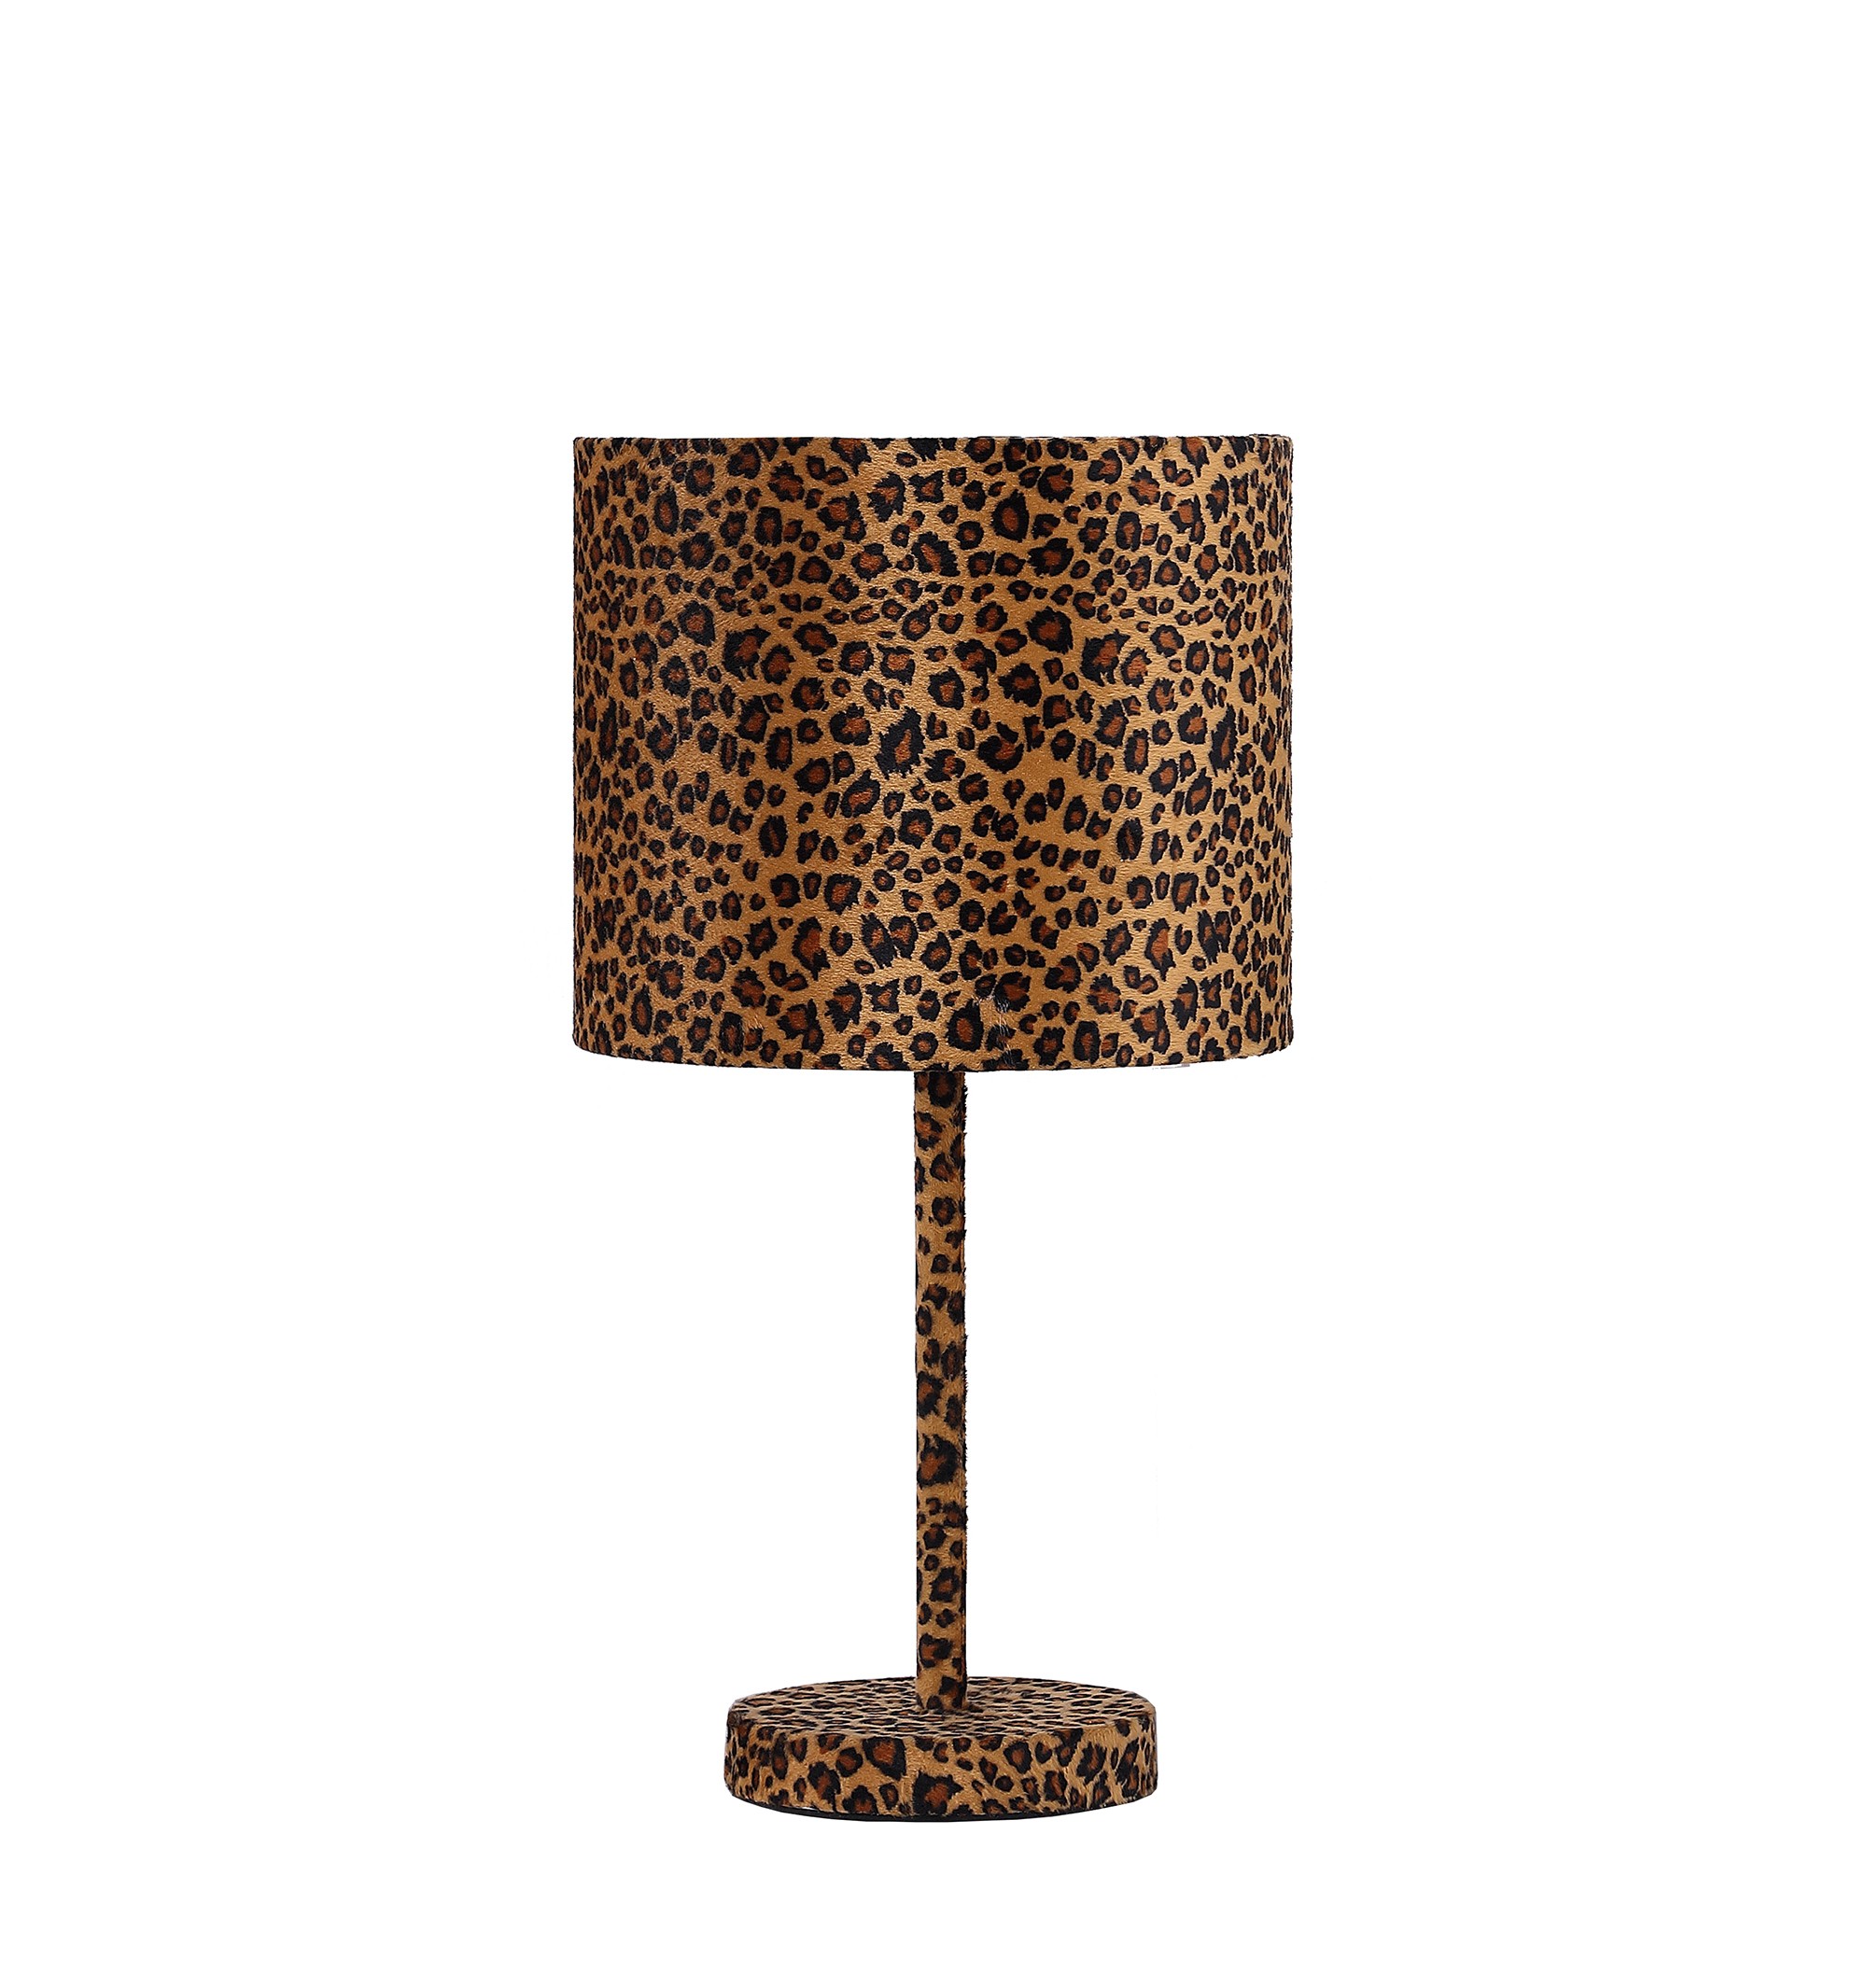 19" Orange And Black Metal Bedside Table Lamp With Orange And Black Drum Shade-468769-1